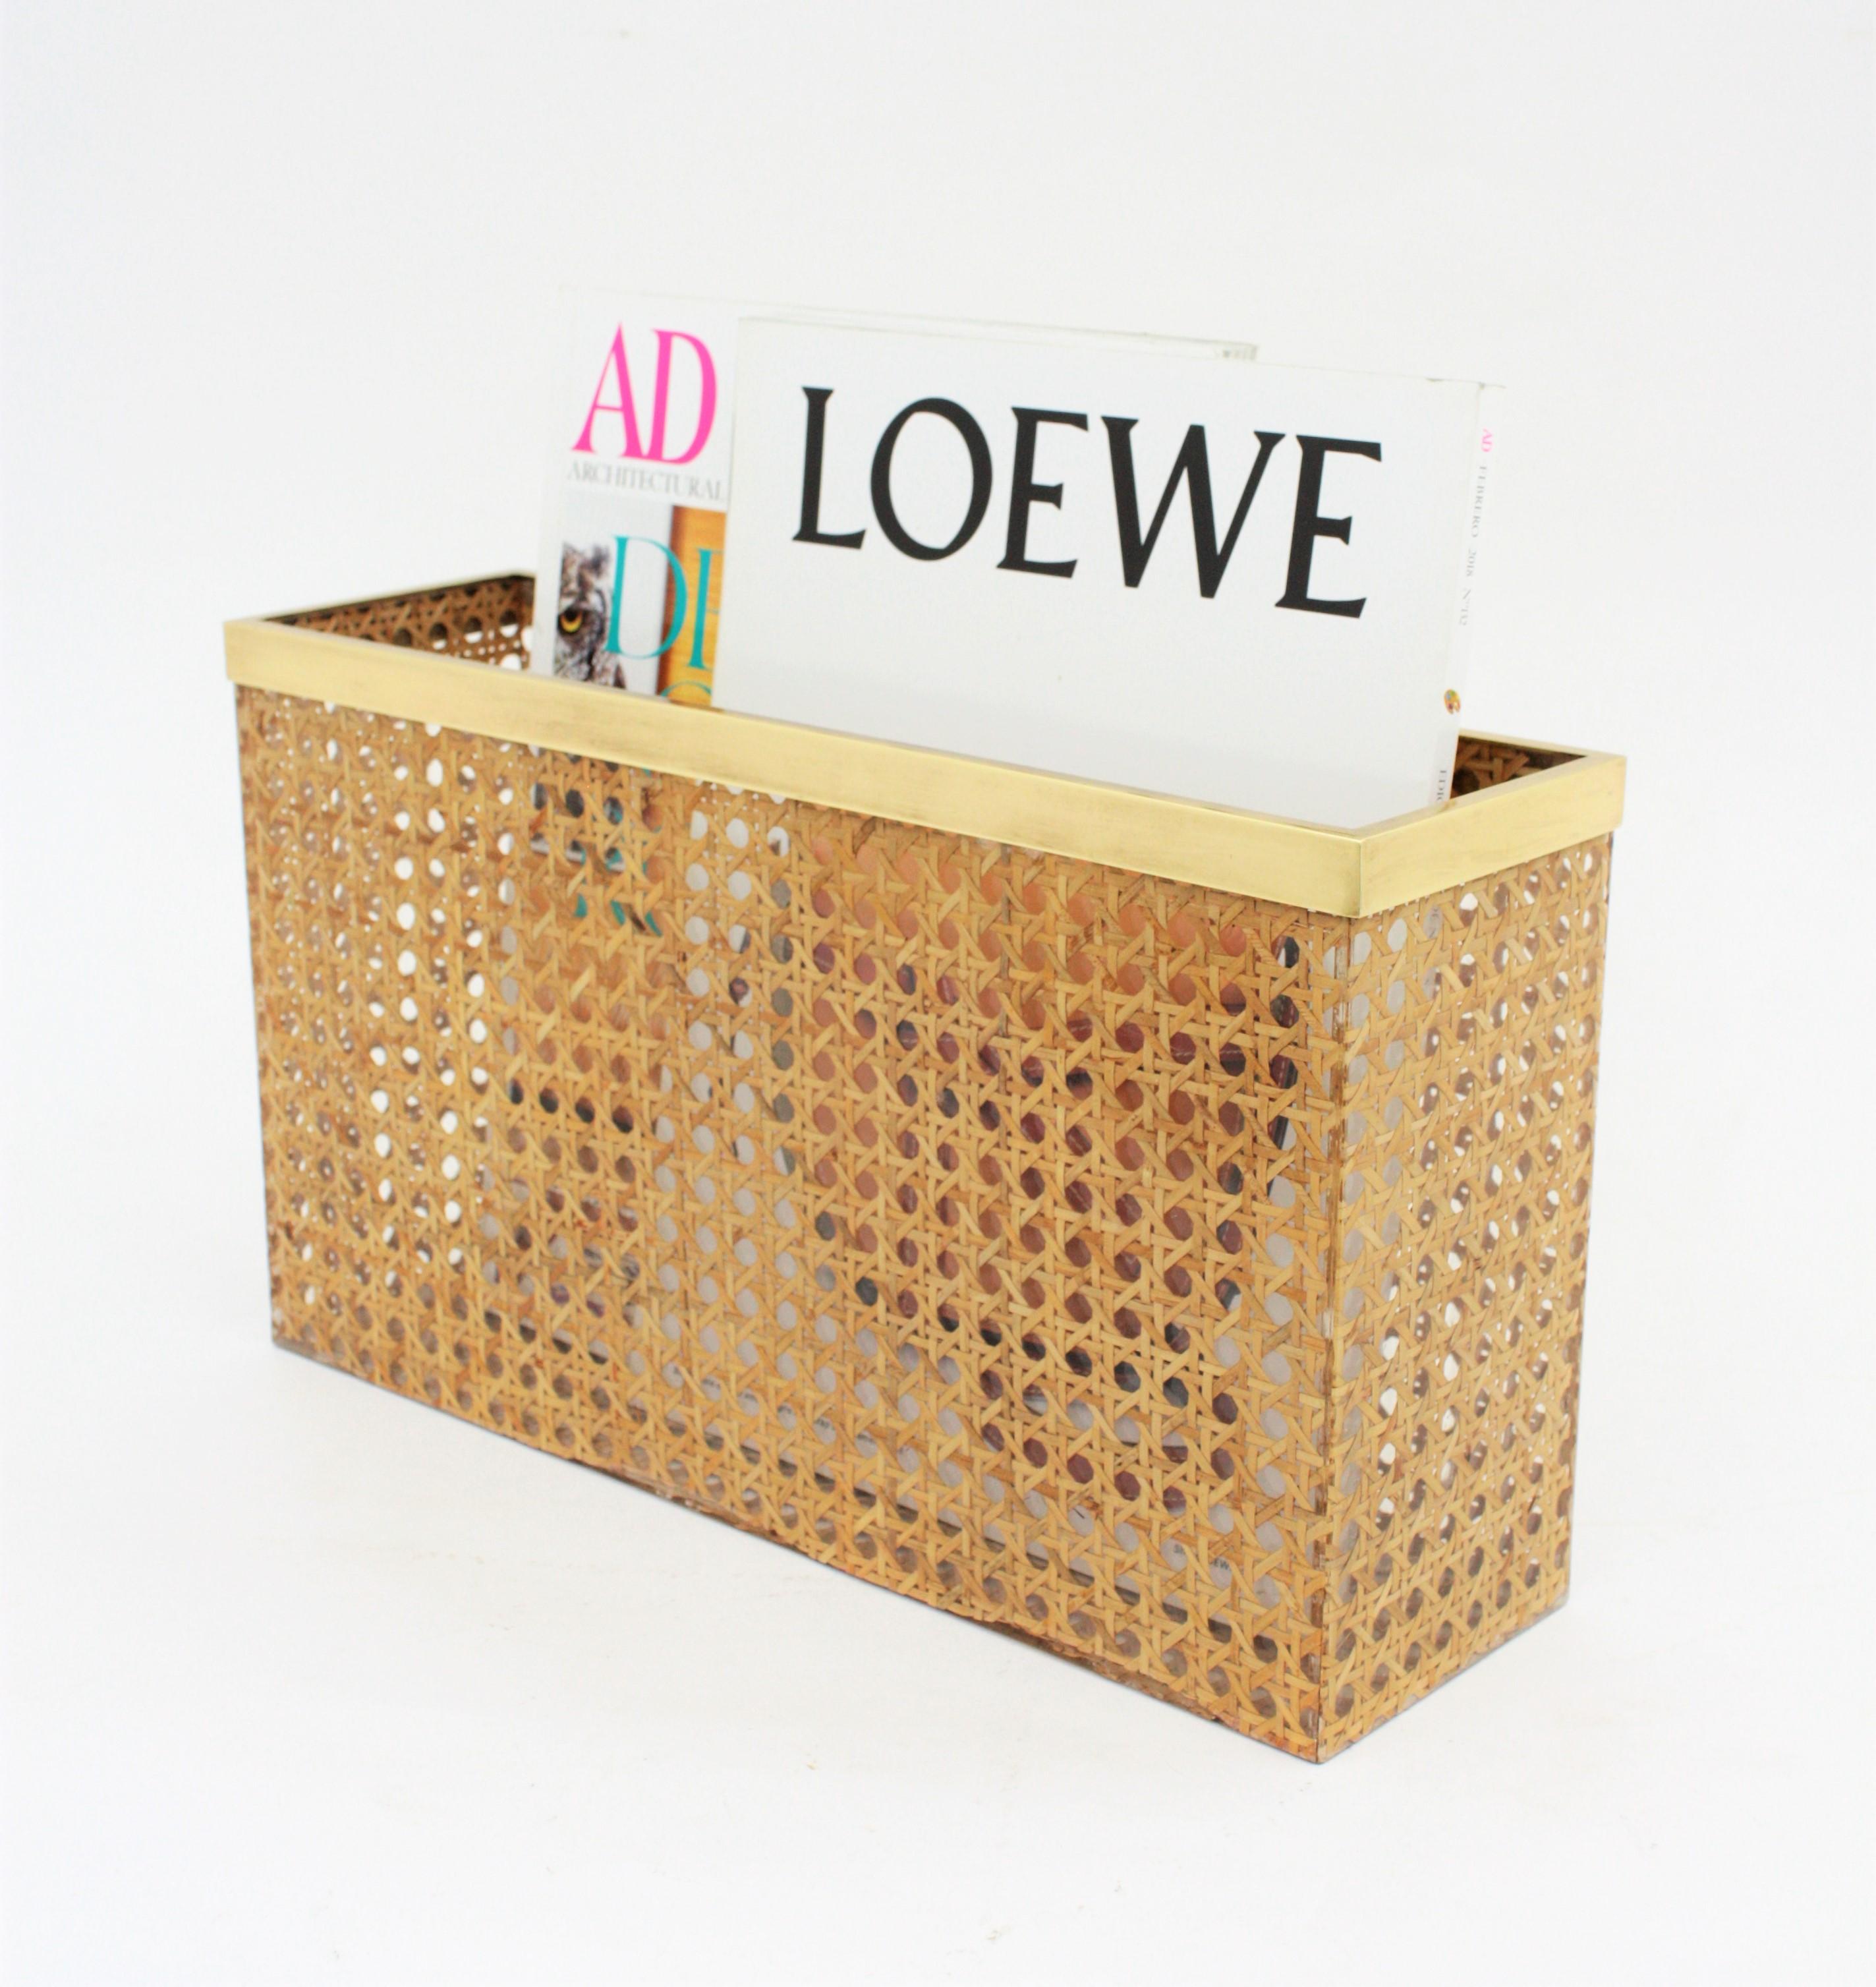 Italian 1970s Dior Home resin over wicker magazine stand with brass accents in the style of Gabriella Crespi.
This stylish Mid-Century Modern magazine rack holder is comprised of Lucite sheets with embedded woven rattan / wicker / cane work with a